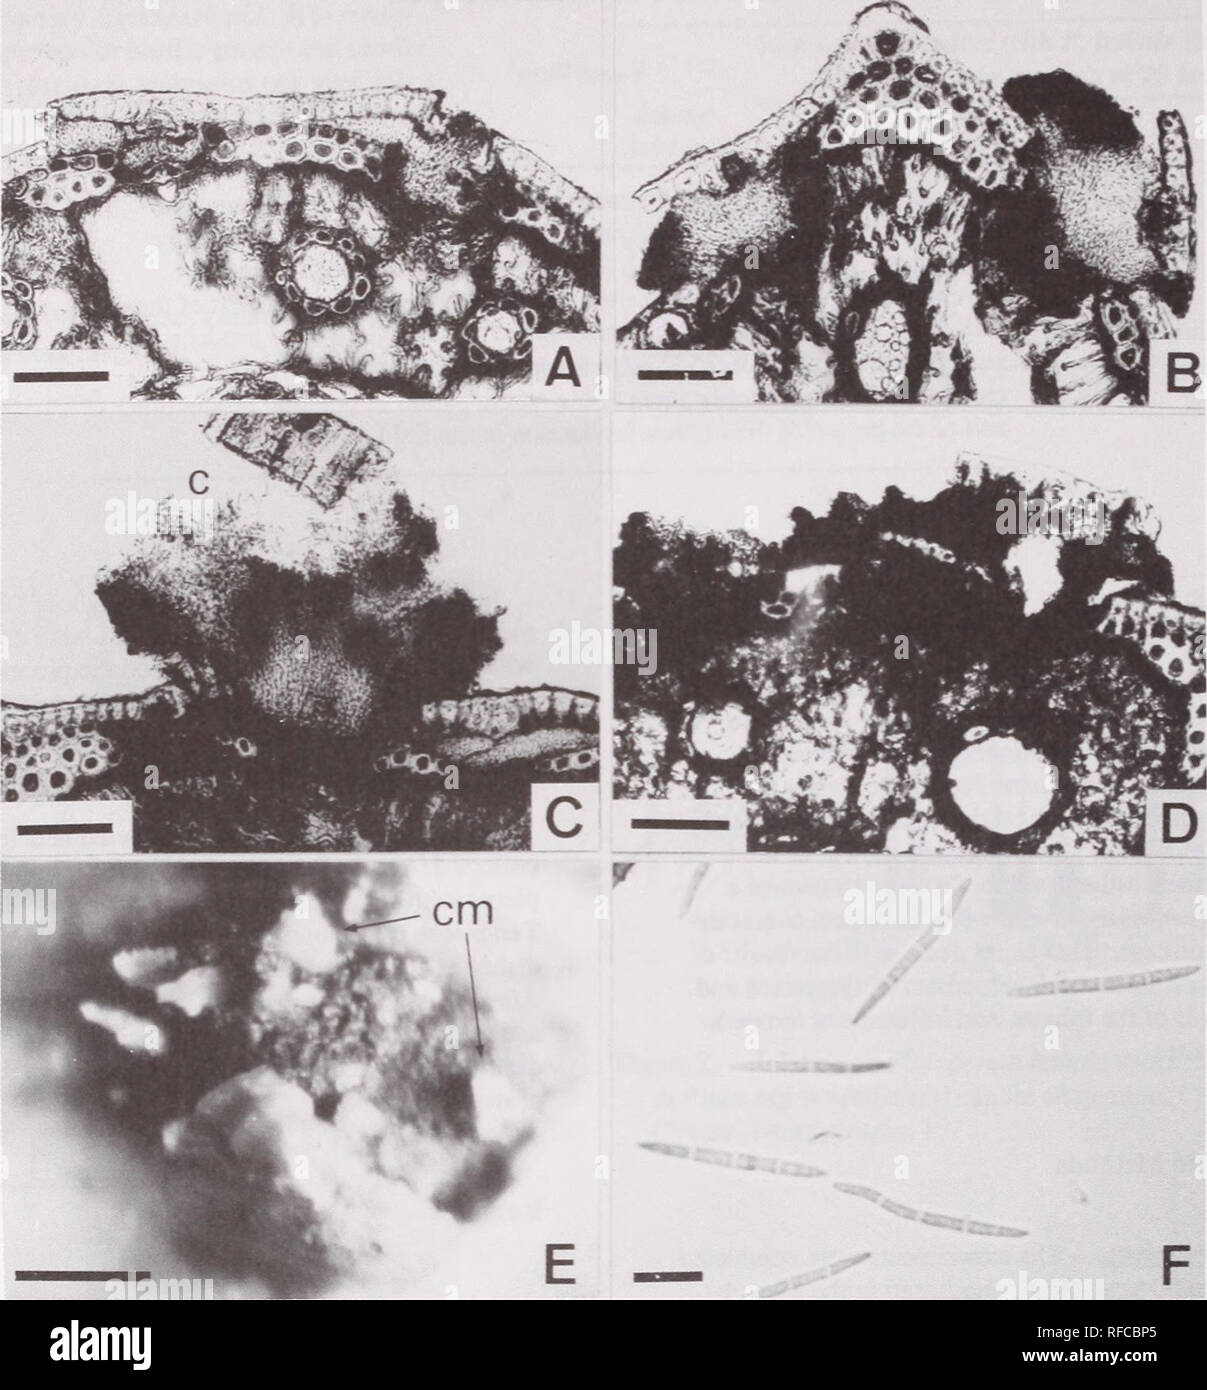 . Recent research on foliage diseases : conference proceedings : Carlisle, Pennsylvania, May 29-June 2, 1989. Leaves Diseases and pests United States Congresses. Figure 1.—Stromatal development and conidial production of Dothistroma septospora. A: Stromata developing under epidermis. B: Stromata appearing on the surface of the lesion by slitting epidermis. C: Stroma producing condidia (c). D: Stroma which has turned black and dried. E: Conidial masses (cm) produced on a stroma. F: Conidia. (Scales: A, B, C, D, E = 100 (im, F = 10 (im) As shown in table 1, conidia were first detected on stromat Stock Photo